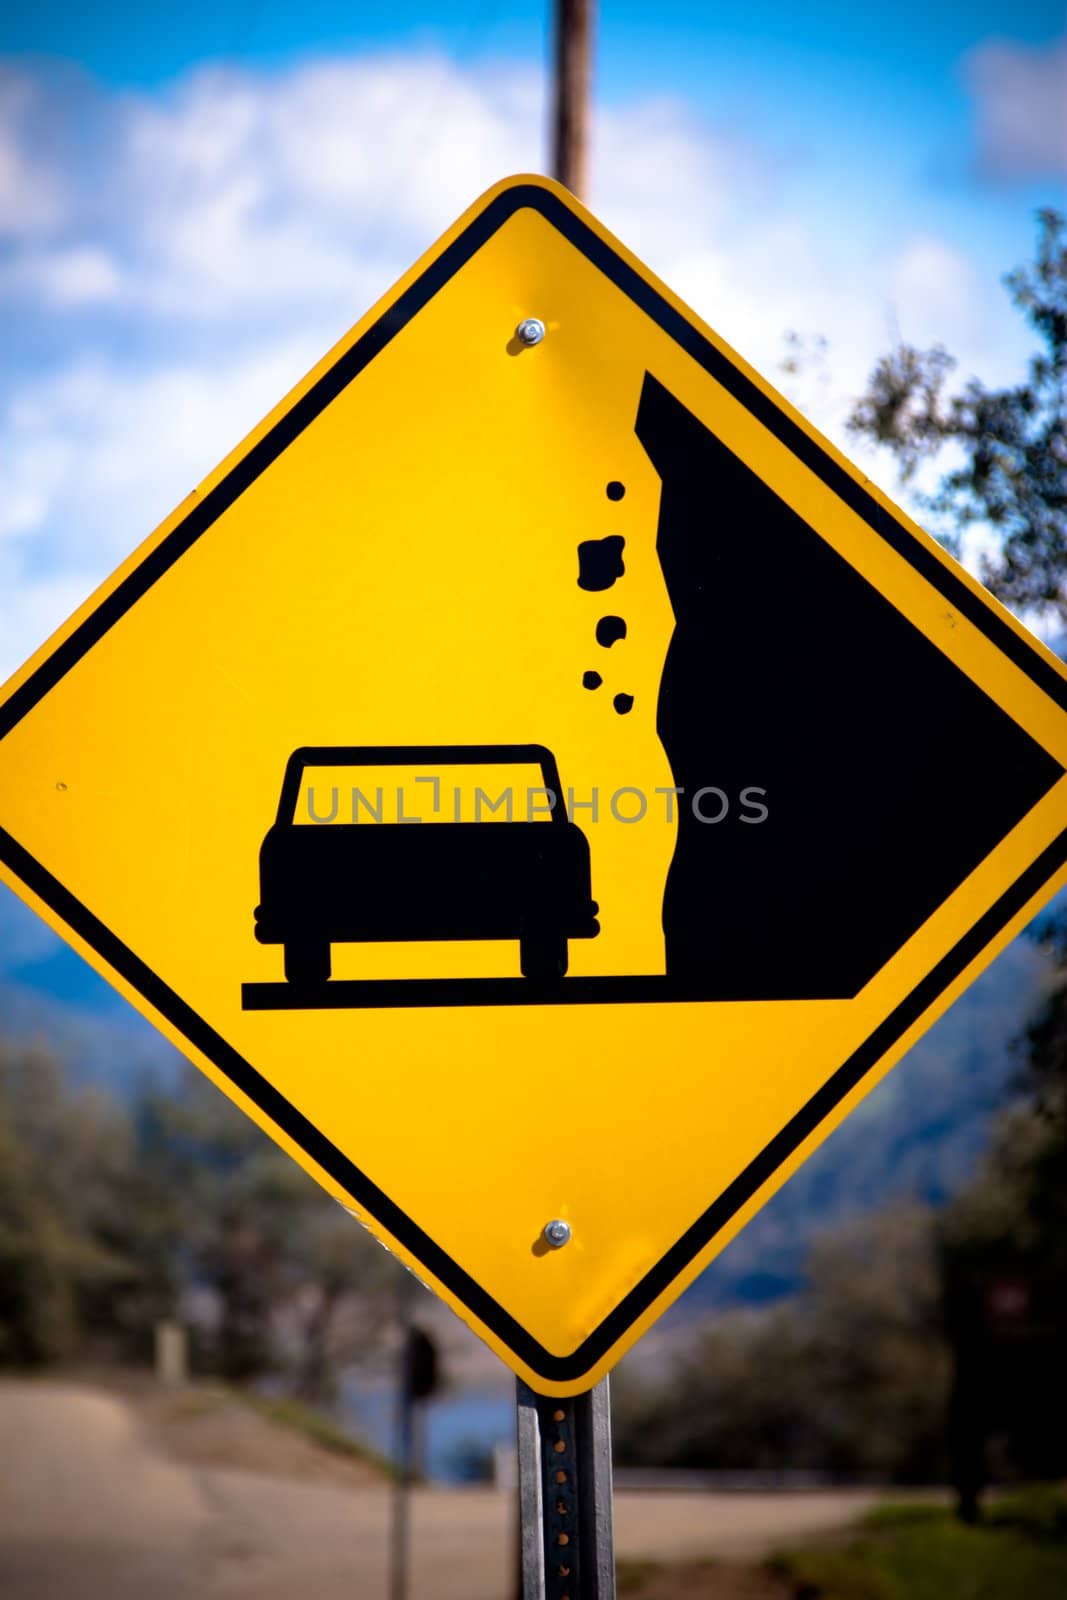 Falling rock street sign by timscottrom